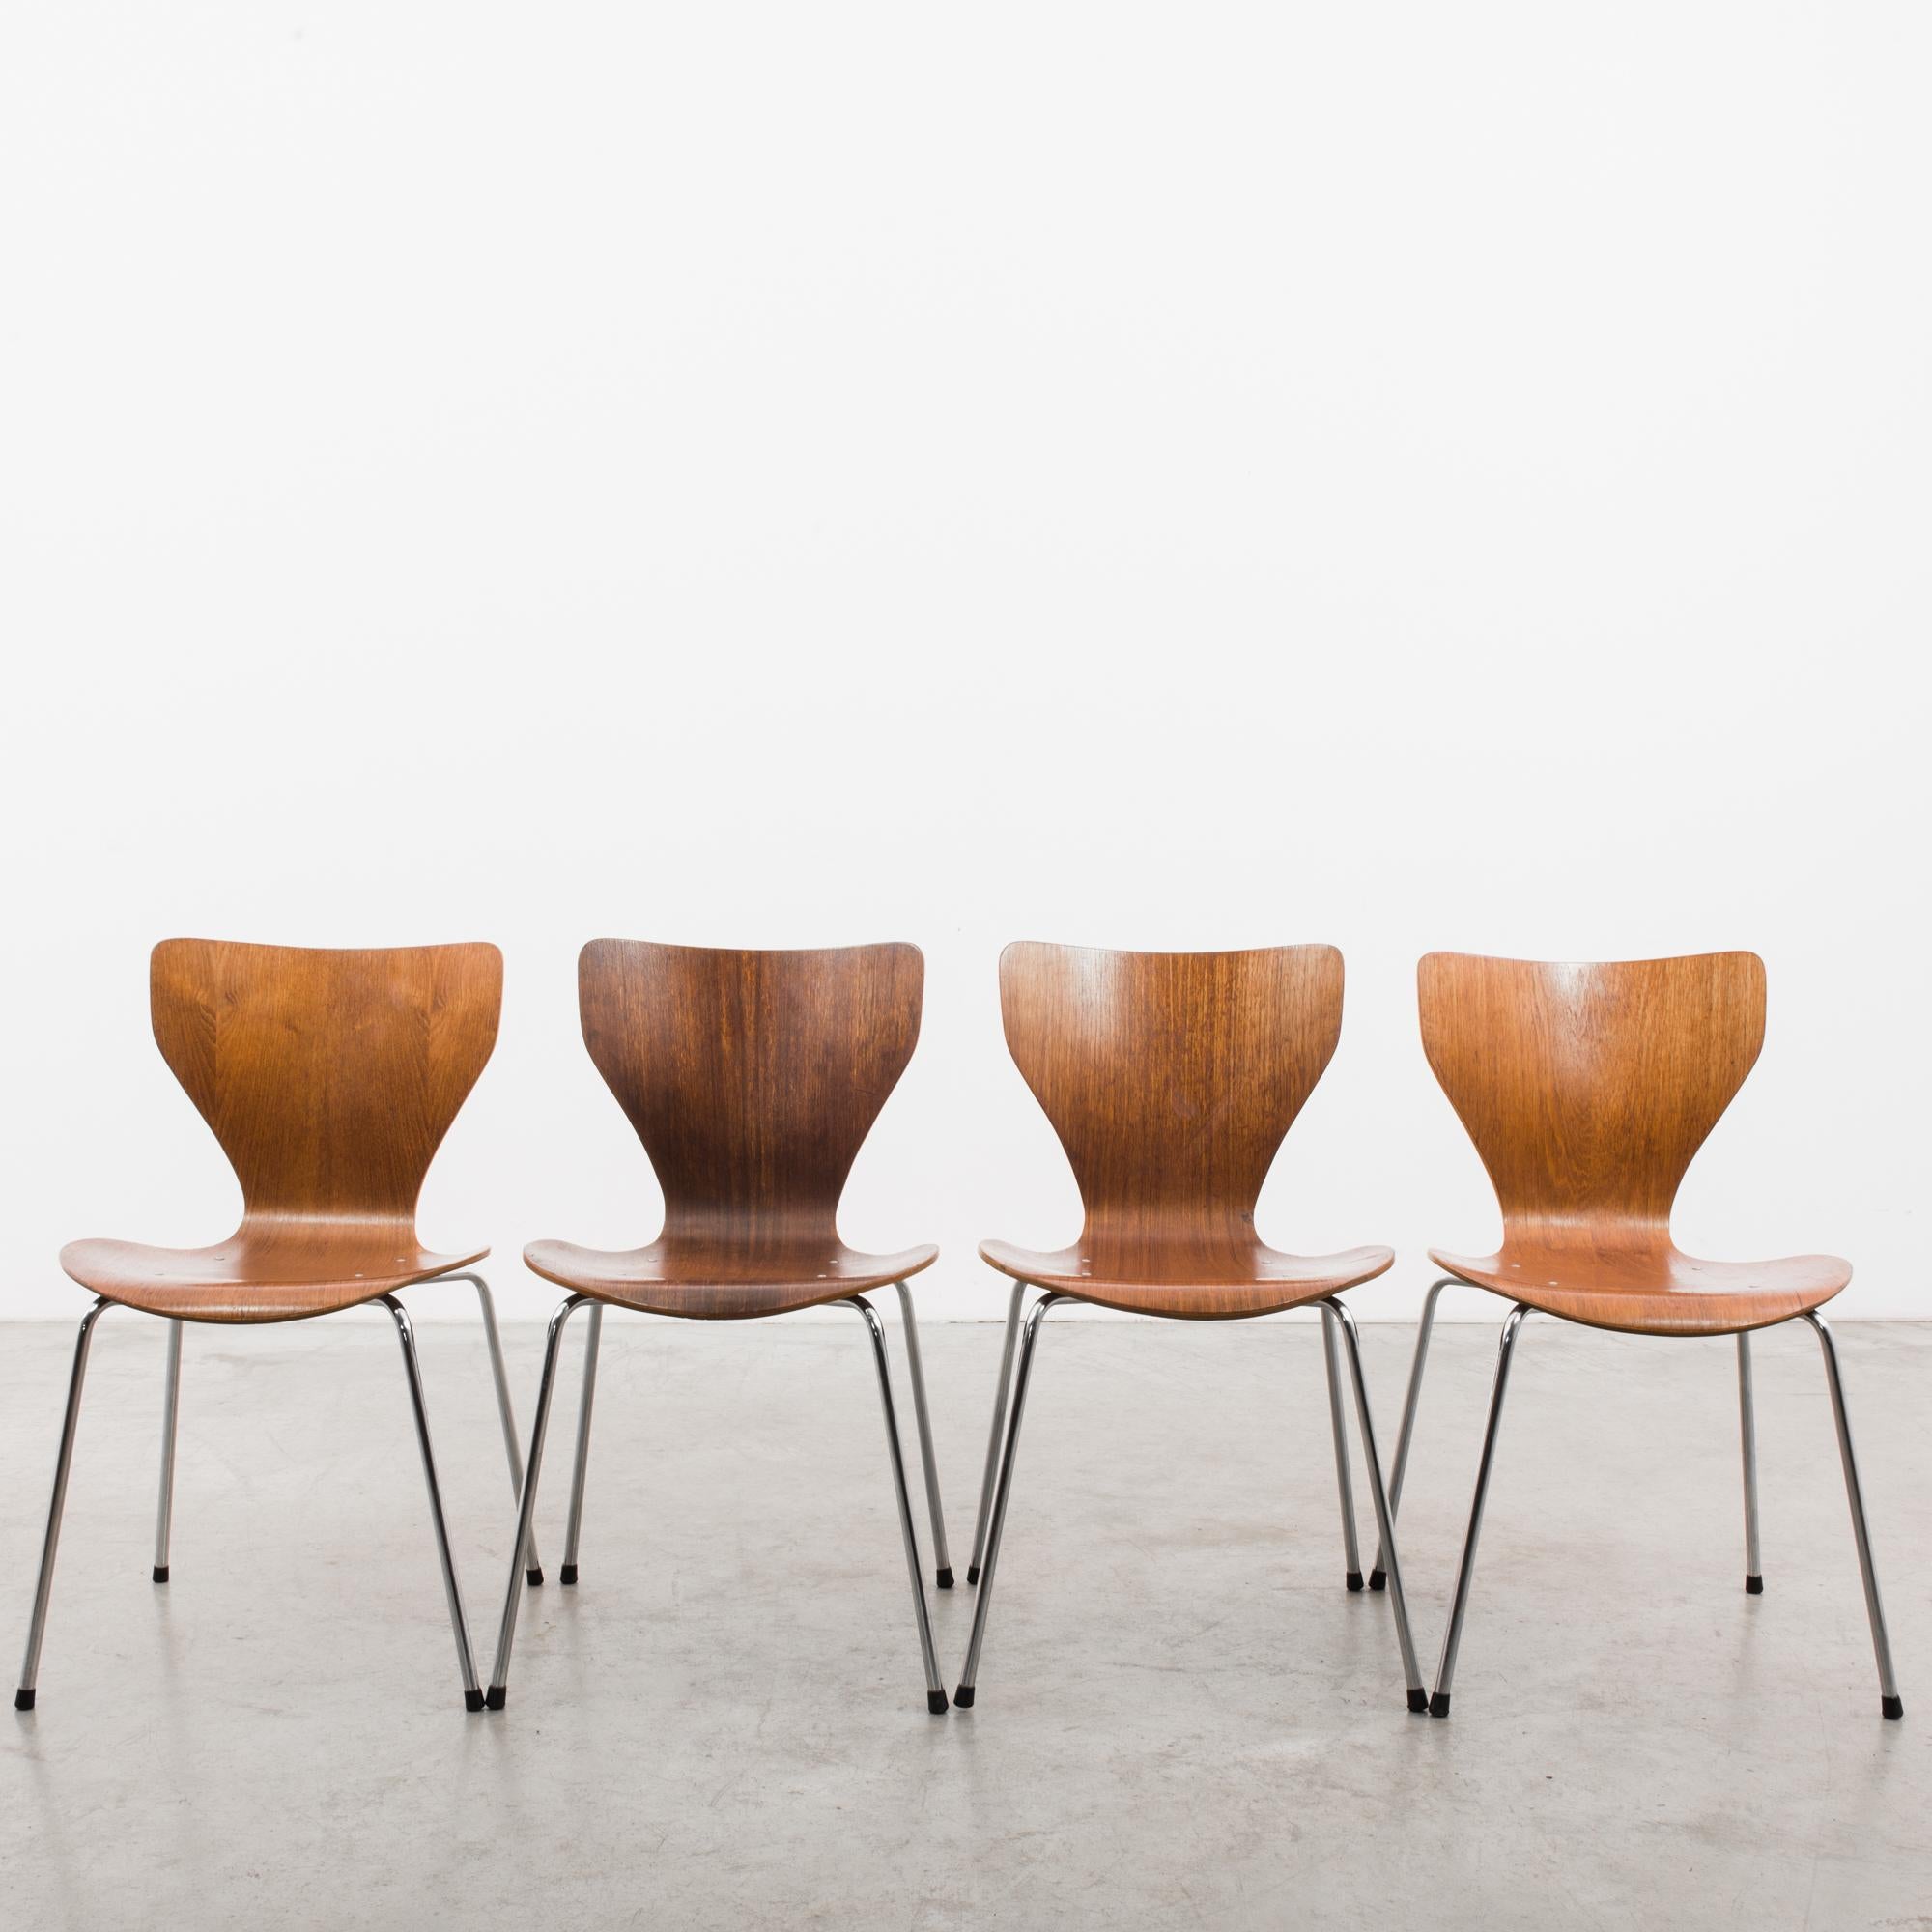 1970s Danish Modern Plywood Chairs, Set of Four 2